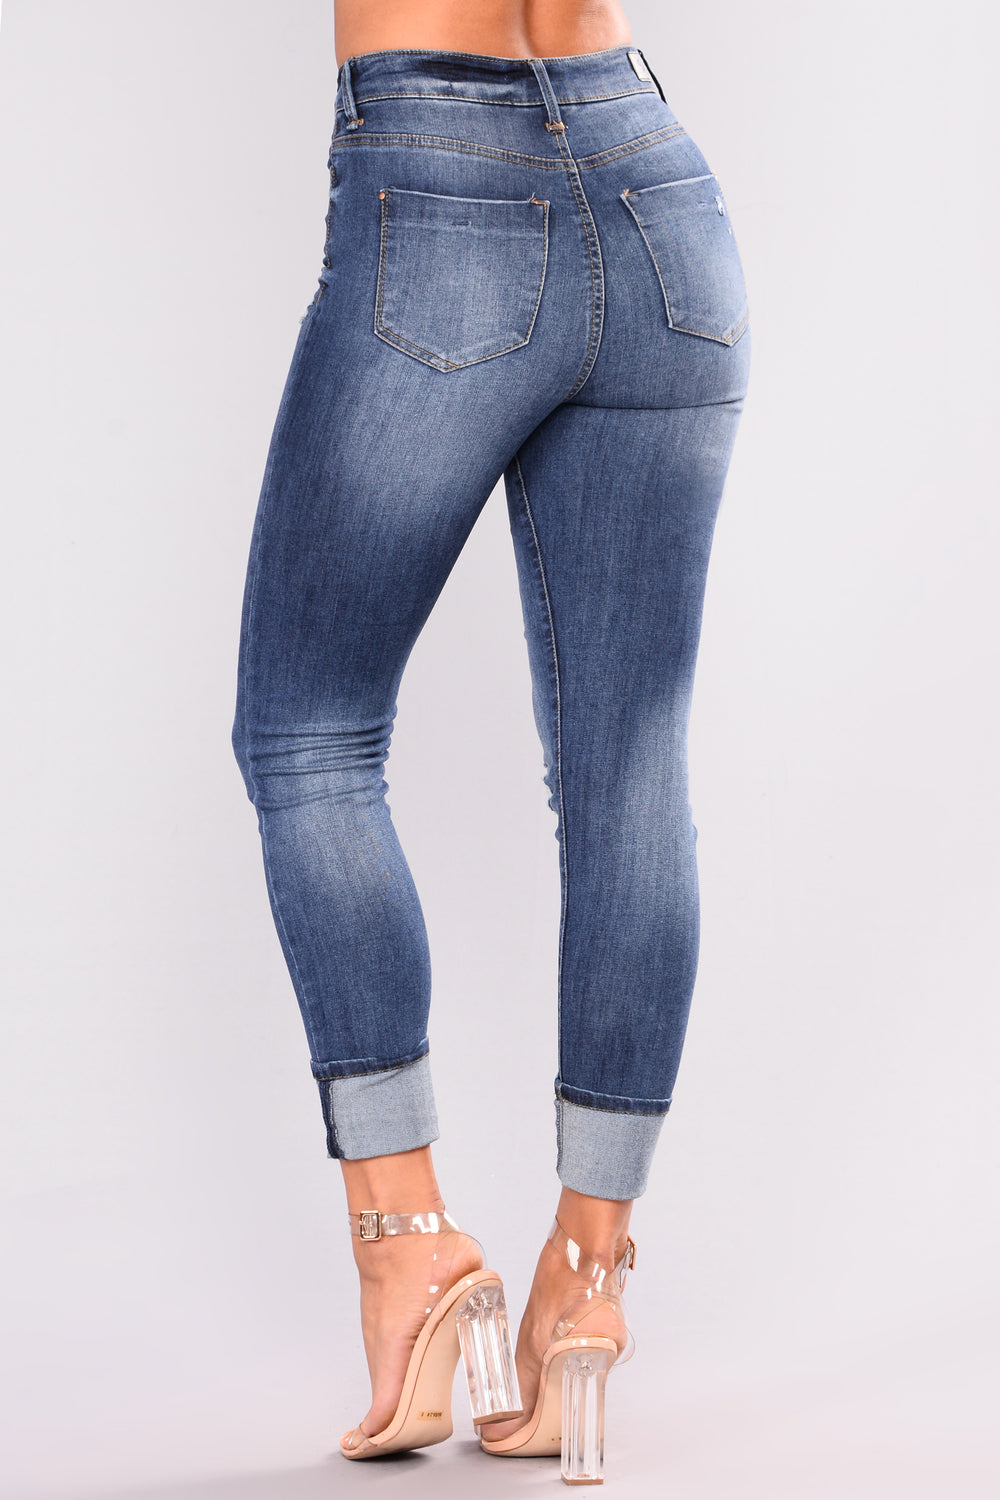 Still Down For You Ankle Jeans - Medium Blue Wash